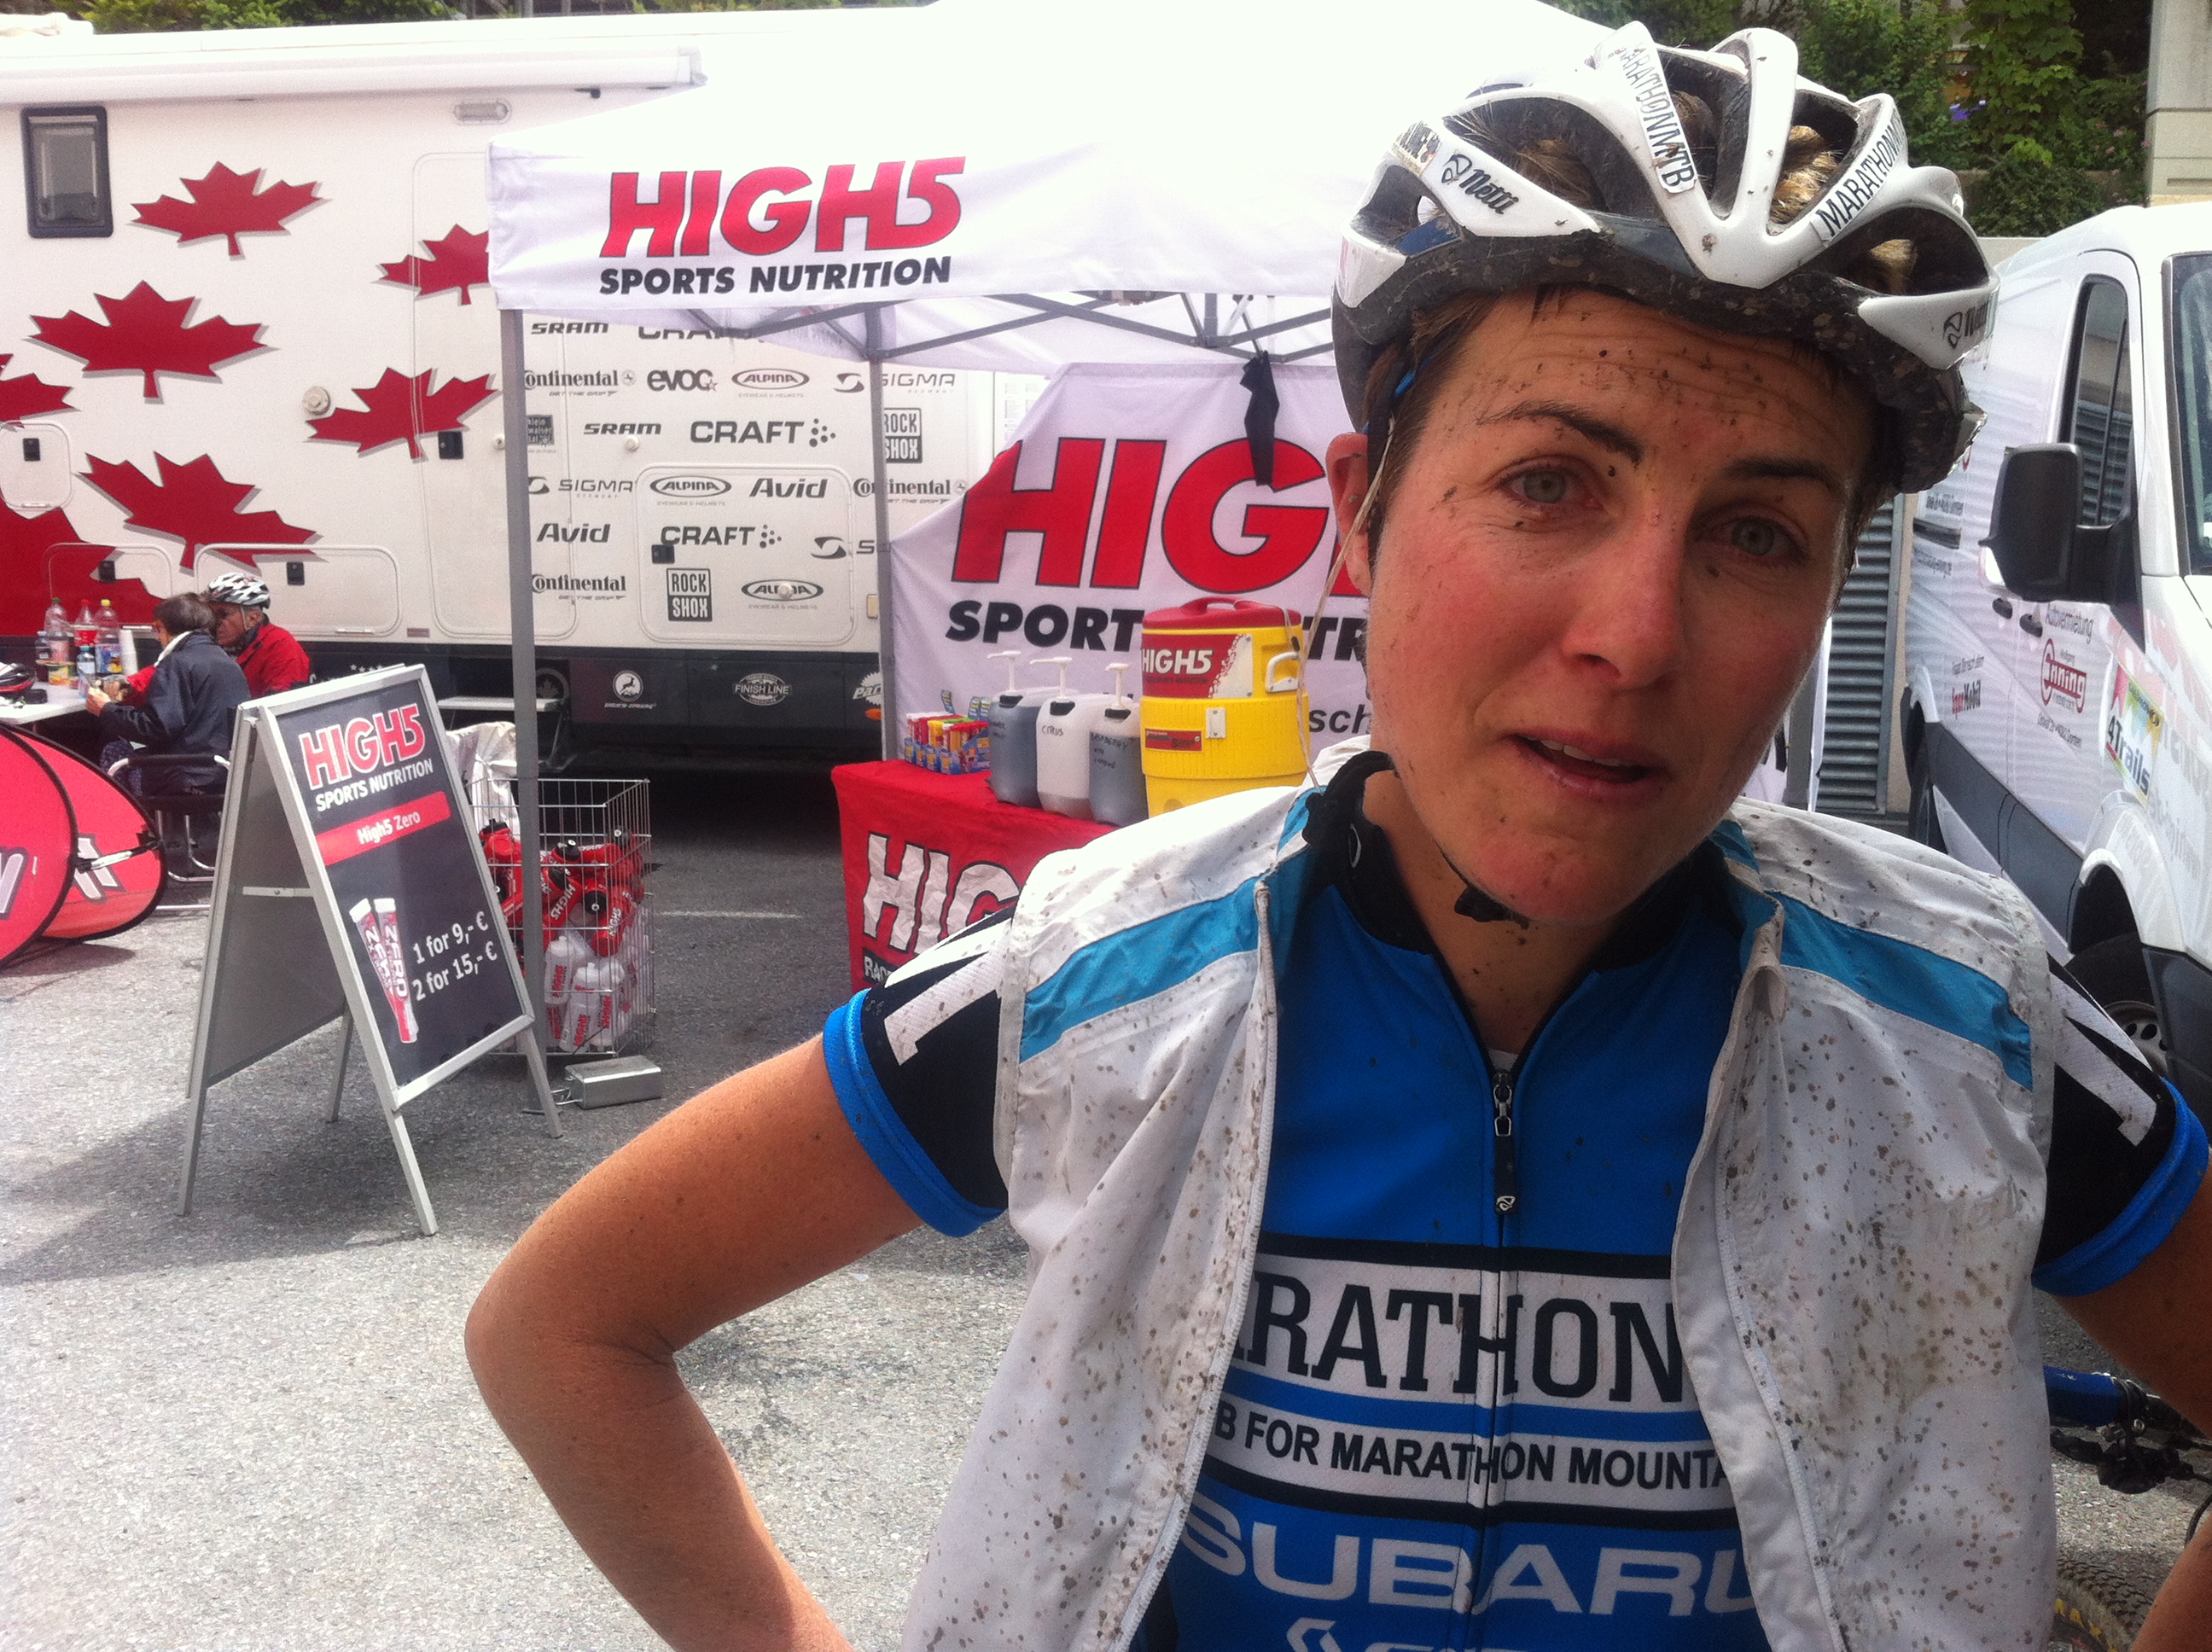 Naomi Hansen - pretty shelled after just under 5hrs racing with tunnel vision